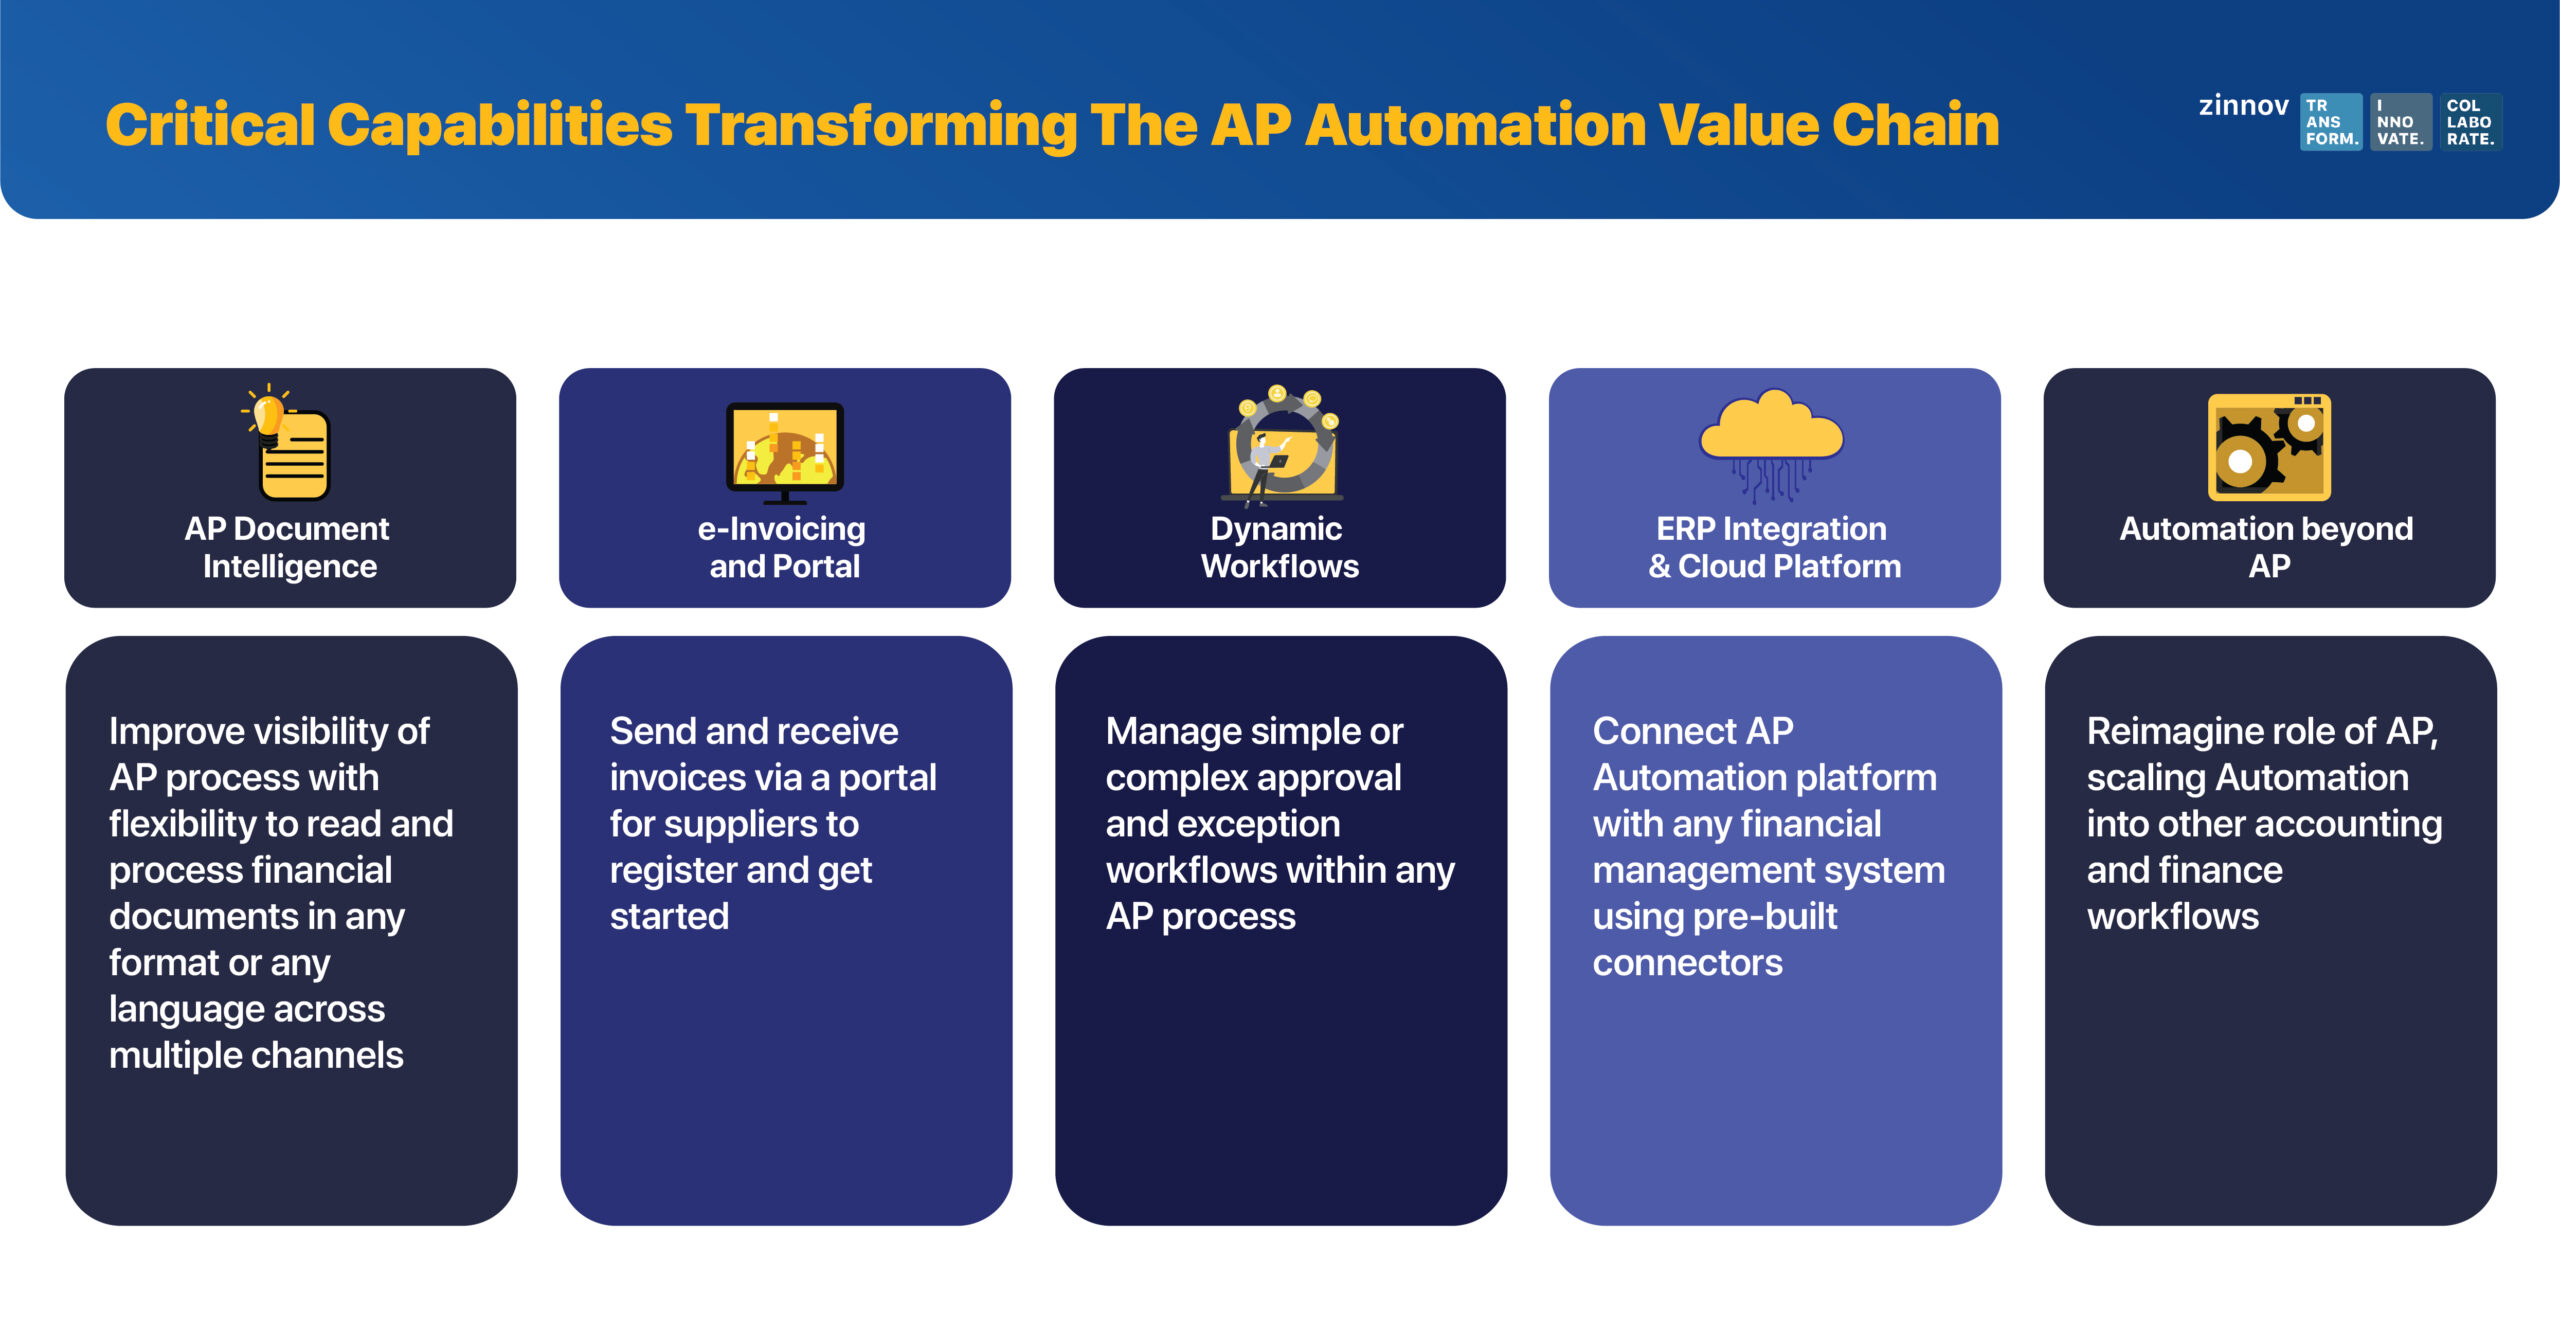 Critical capabilities transforming the AP automation value chain